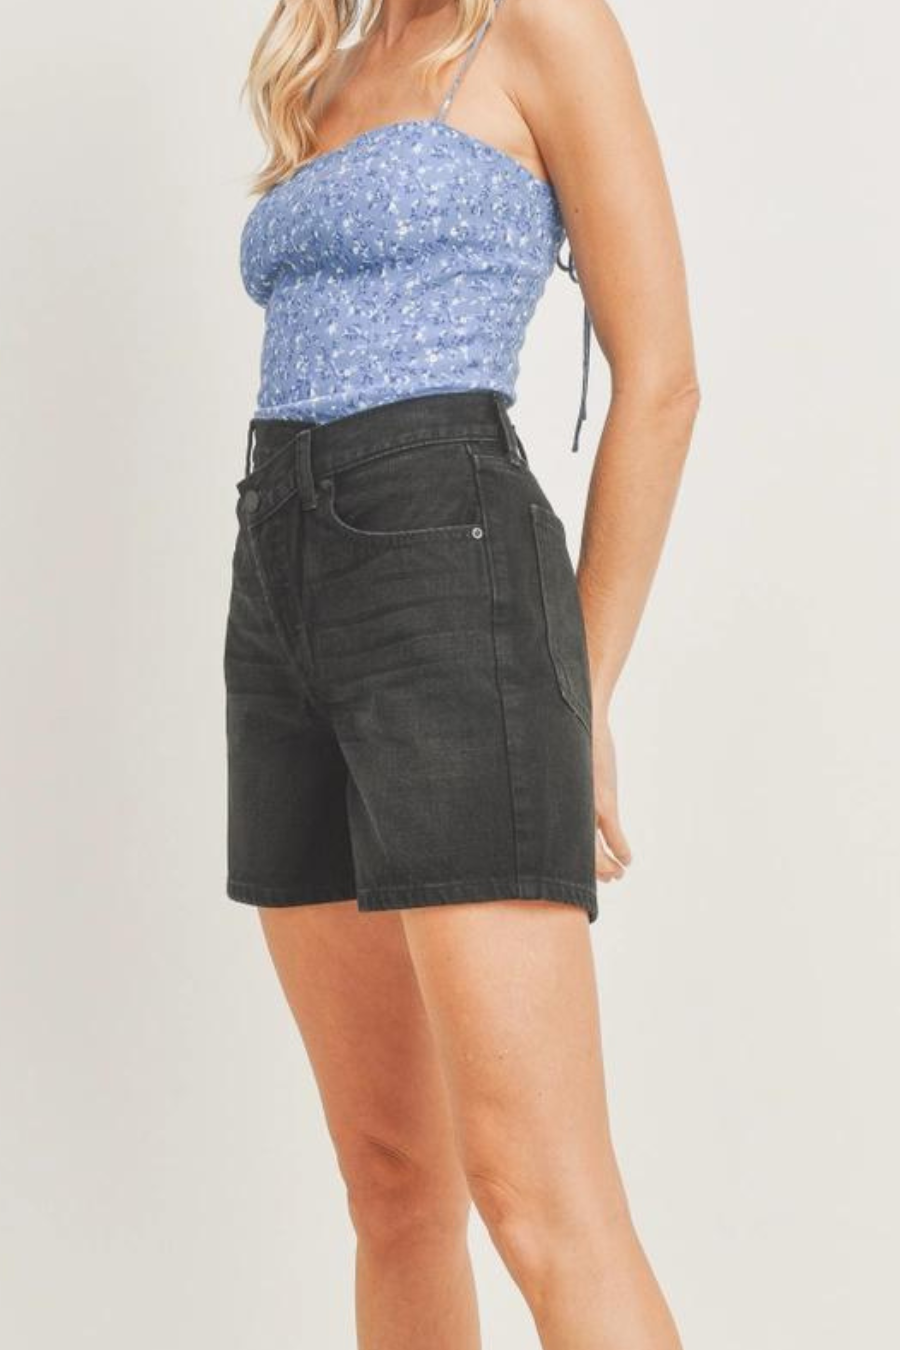 side view of girl wearing blue top with flowers on it and black denim shorts 